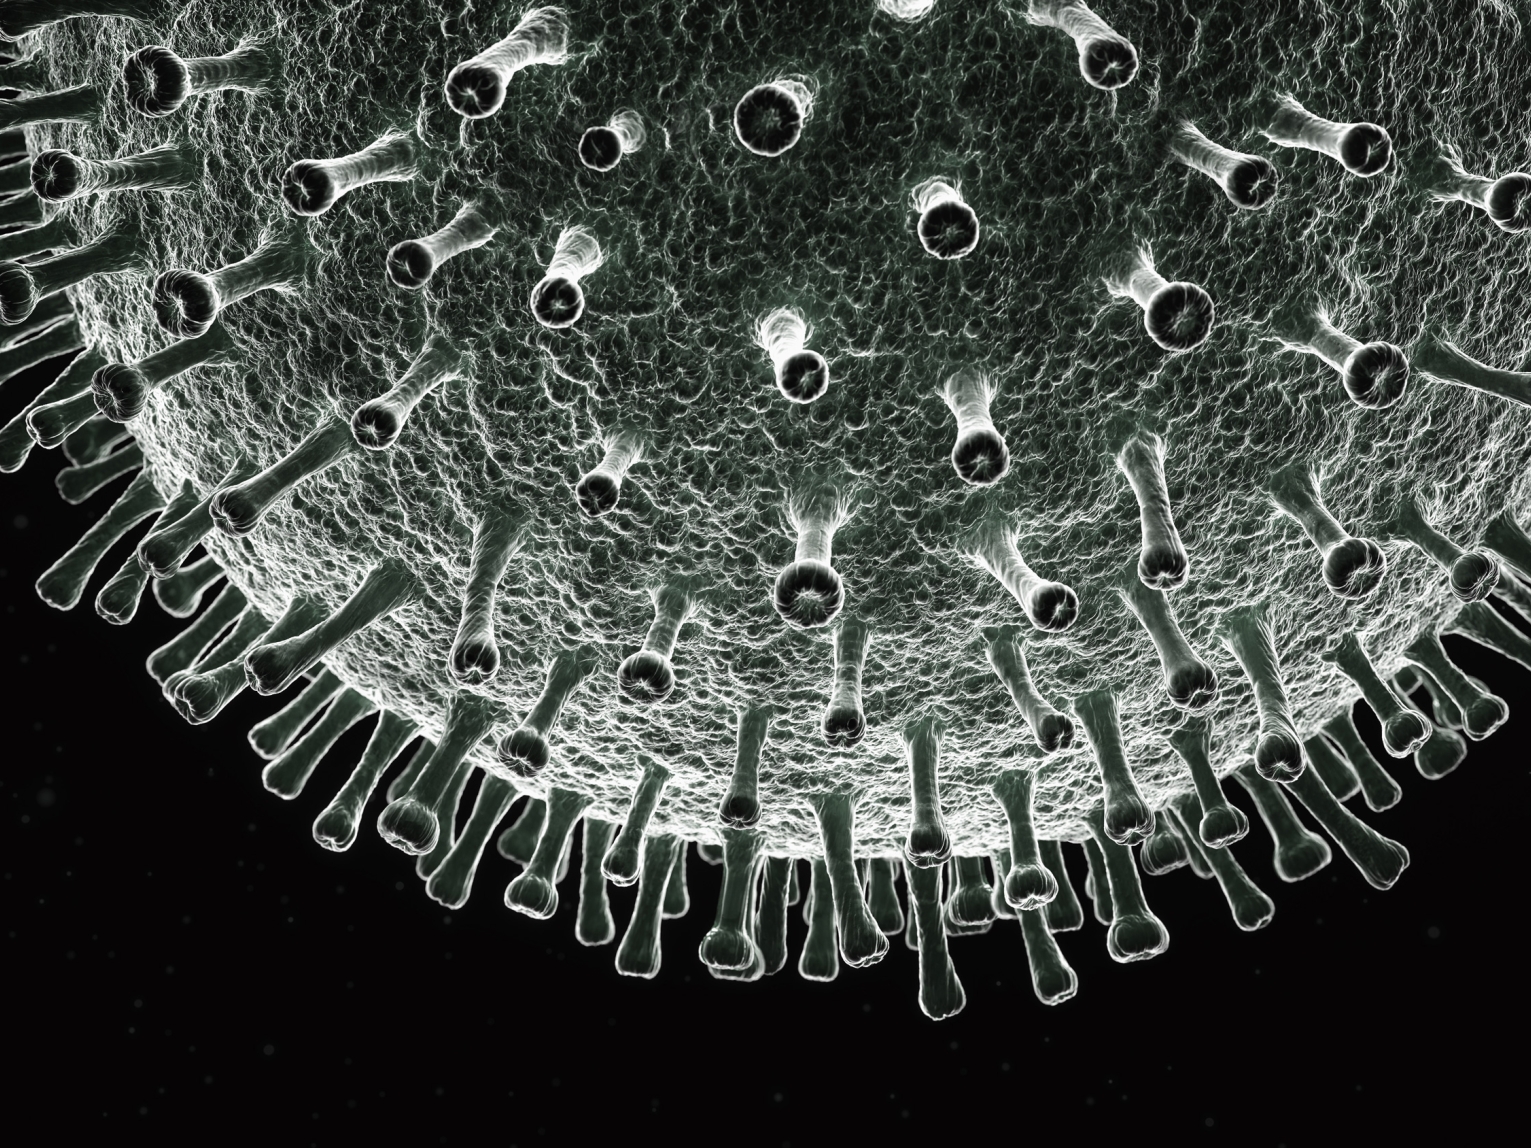 3D rendering of theCOVID-19 virus.